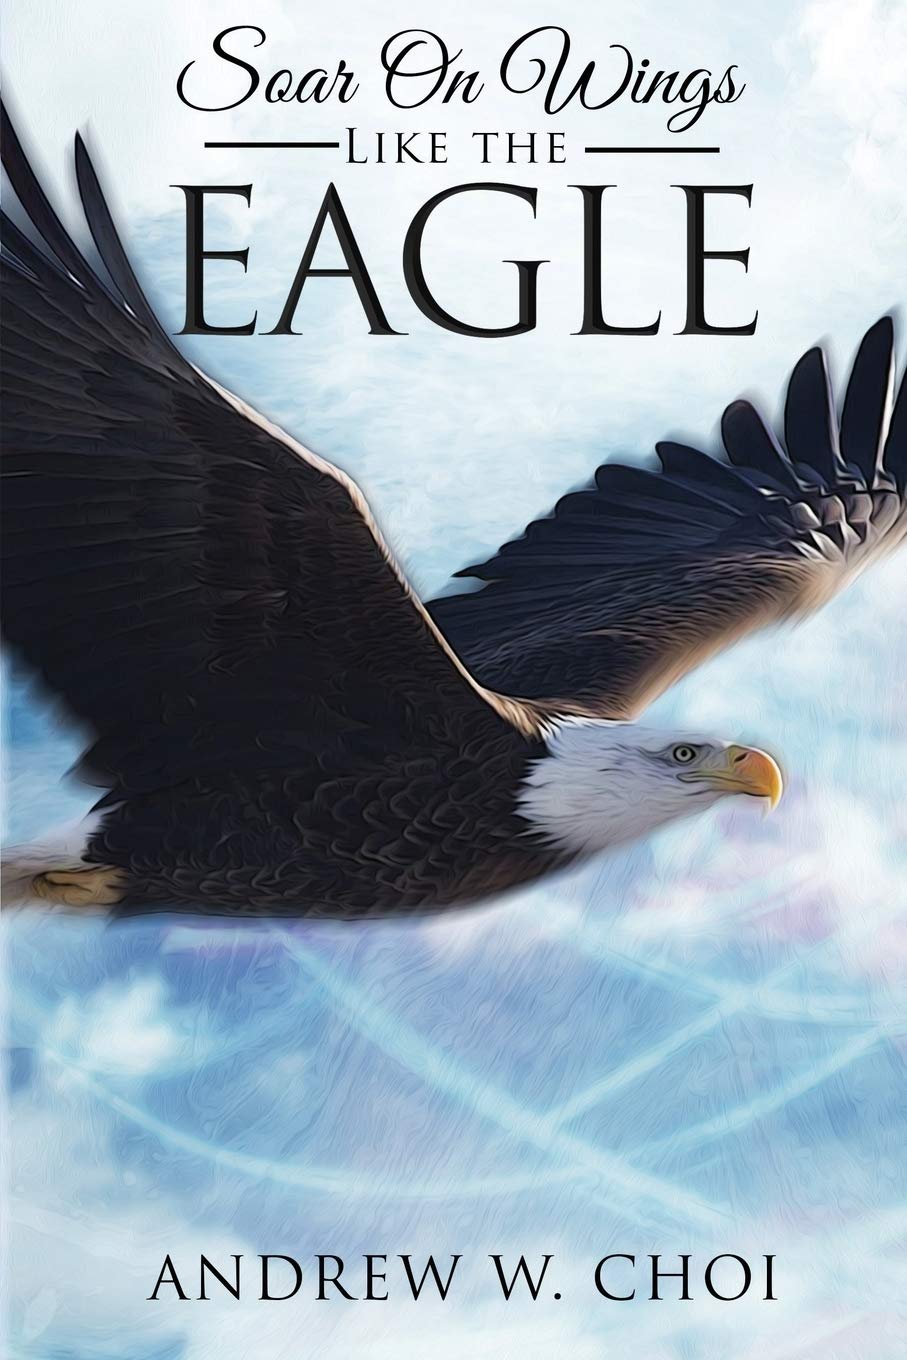 Author's Tranquility Press presents "Soar on Wings Like the Eagle" written by Andrew Choi